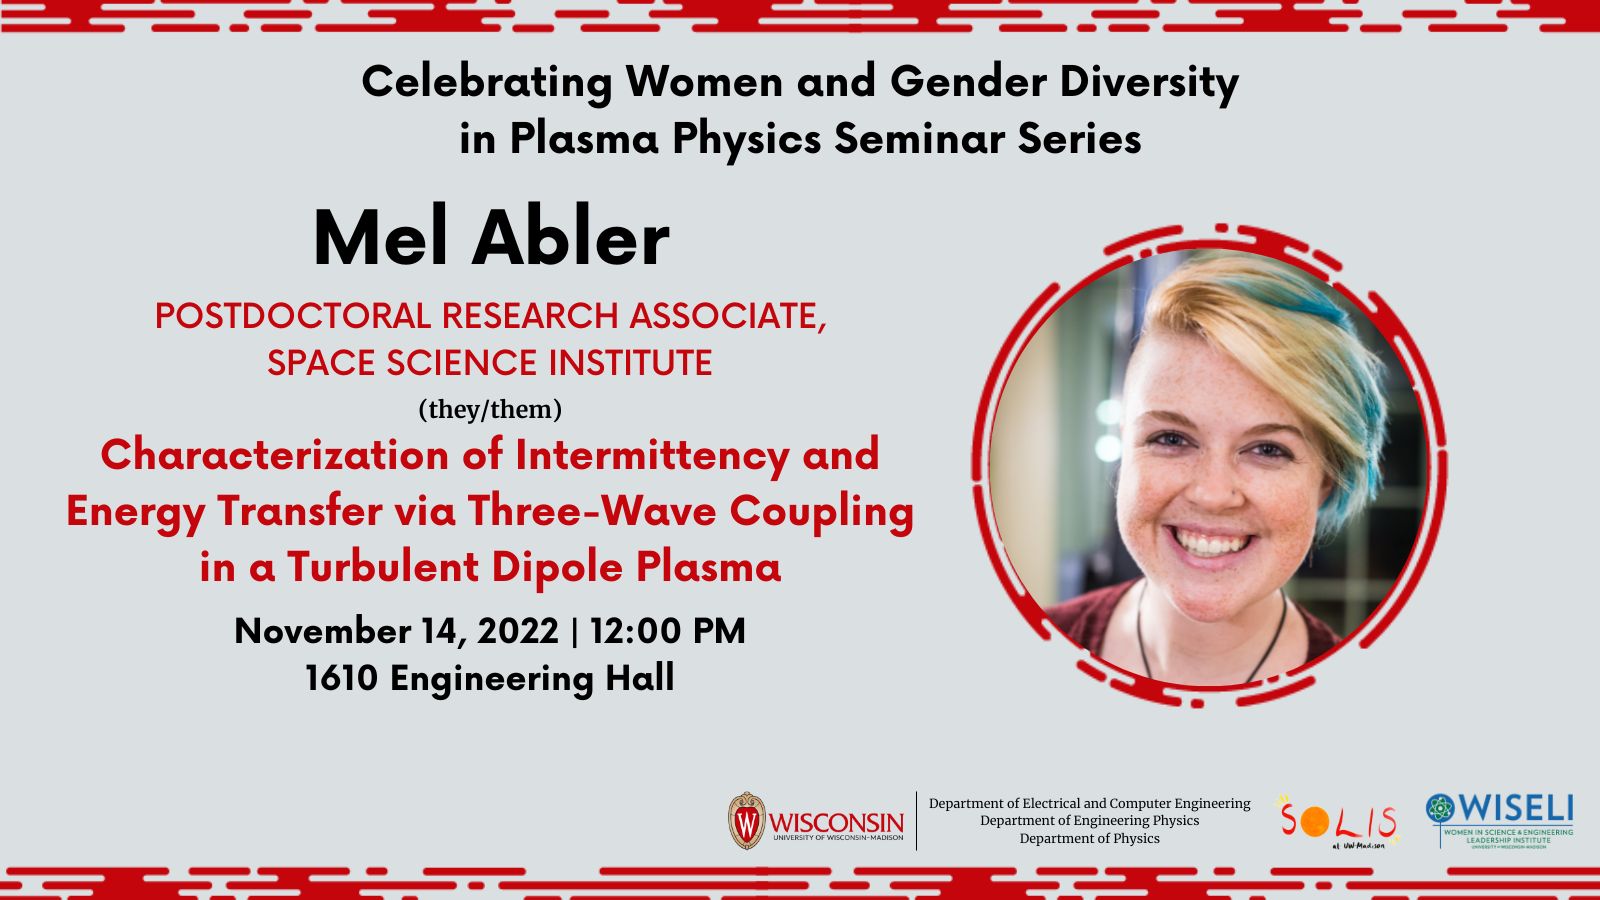 An image of Mel Abler. Text reads "Celebrating Women and Gender Diversity in Plasma Physics Seminar Series; Mel Abler; Postdoctoral Research Associate, Space Science Institute; (they/them); Characterization of Intermittency and Energy Transfer via Three-Wave Coupling in a Turbulent Dipole Plasma; November 14, 2022; 12:00 PM; 1610 Engineering Hall". UW-Madison logo, Solis logo, WISELI logo